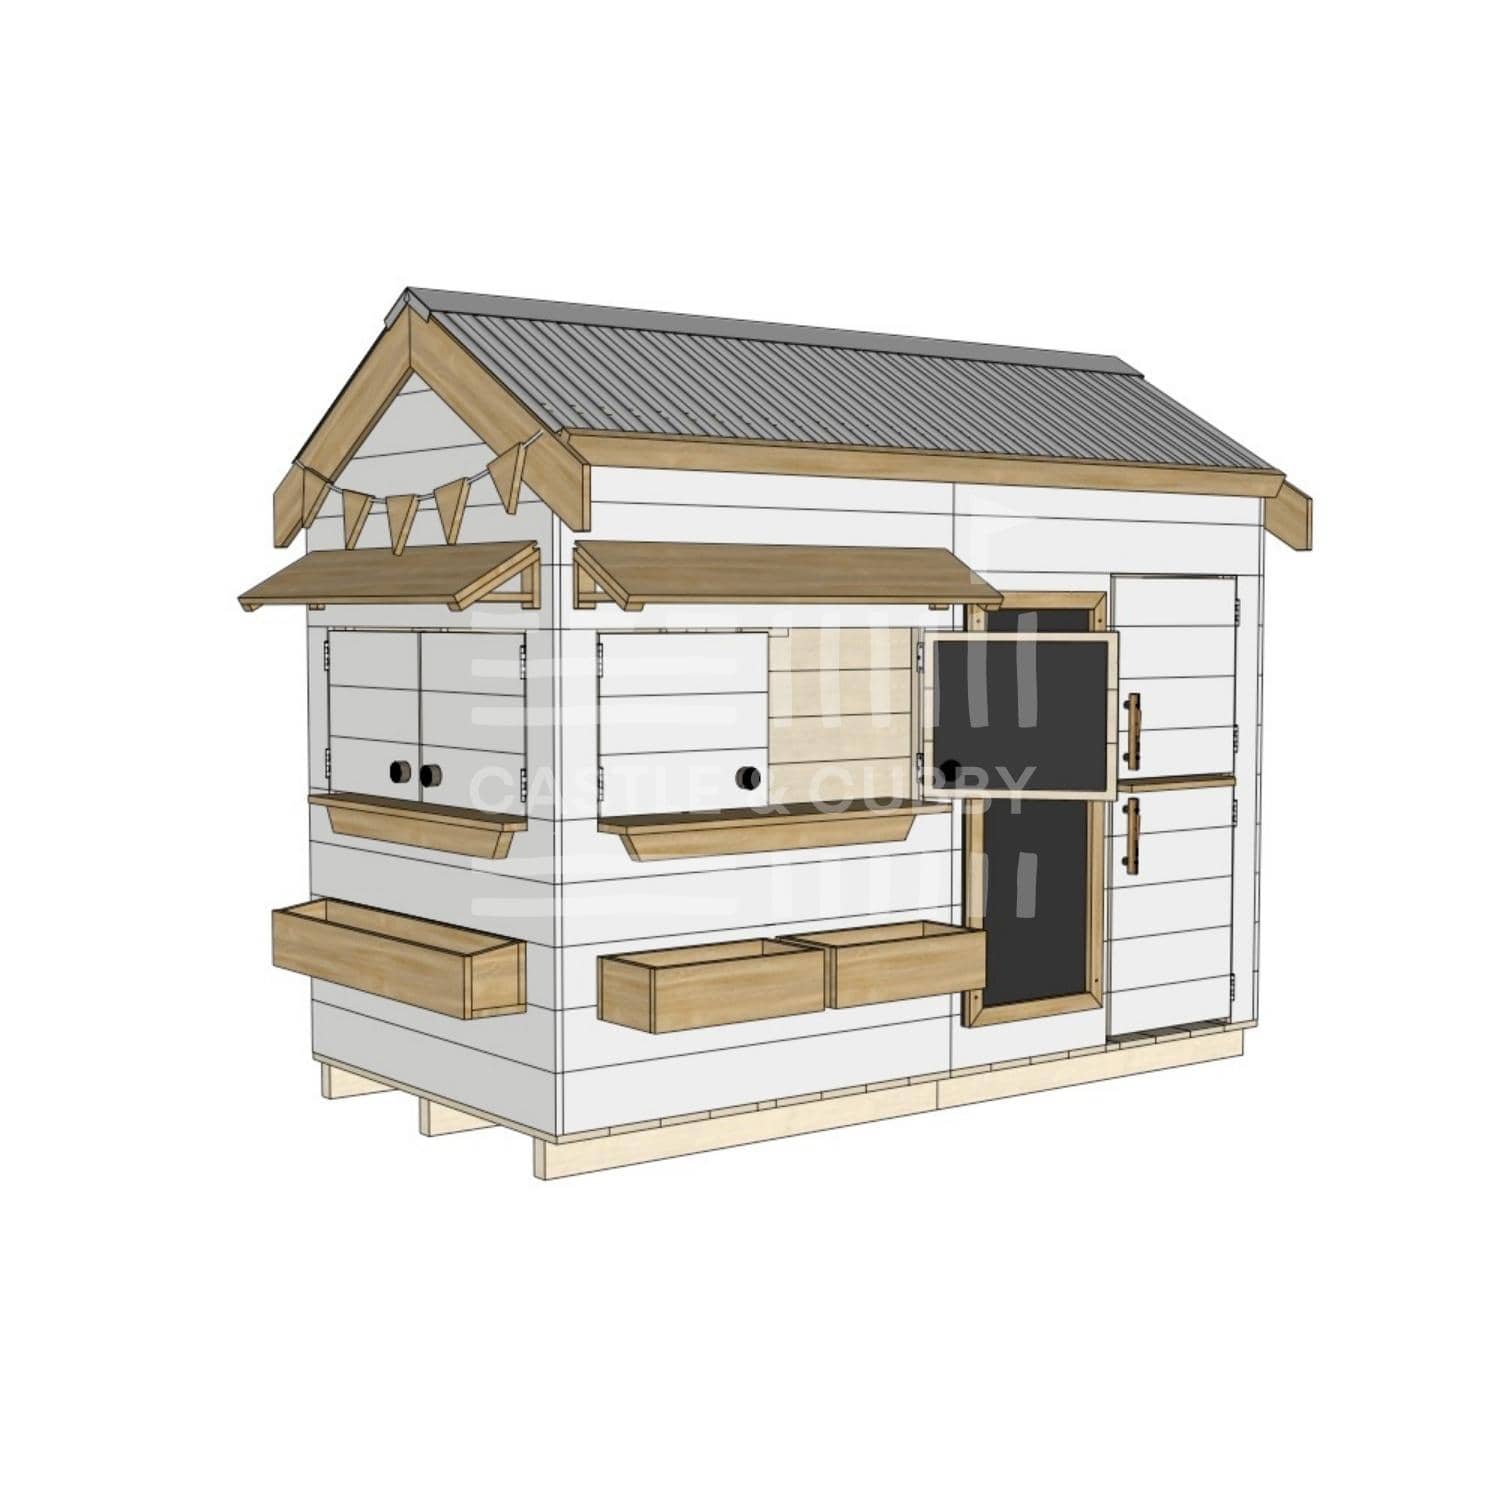 Pitched roof painted wooden cubby house residential and family homes midi rectangle accessories